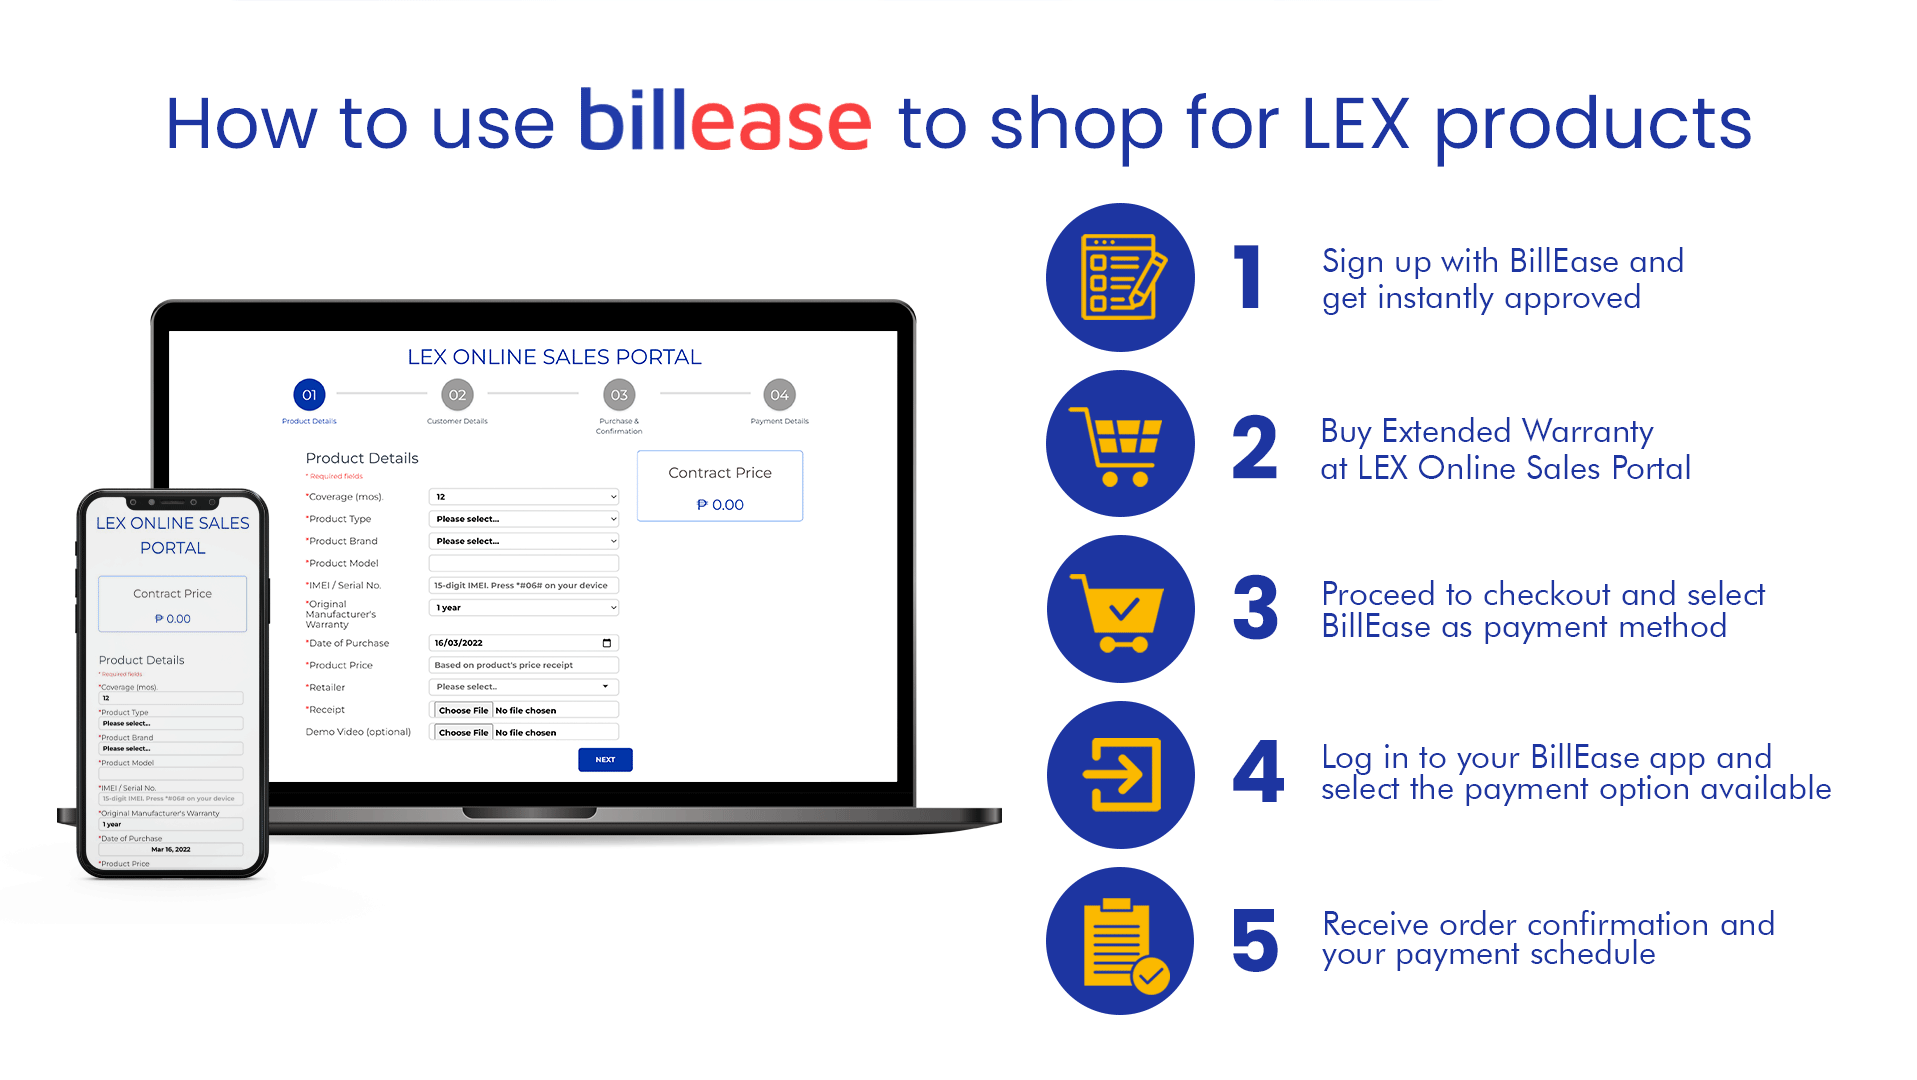 How to use BillEase to shop for LEX Products